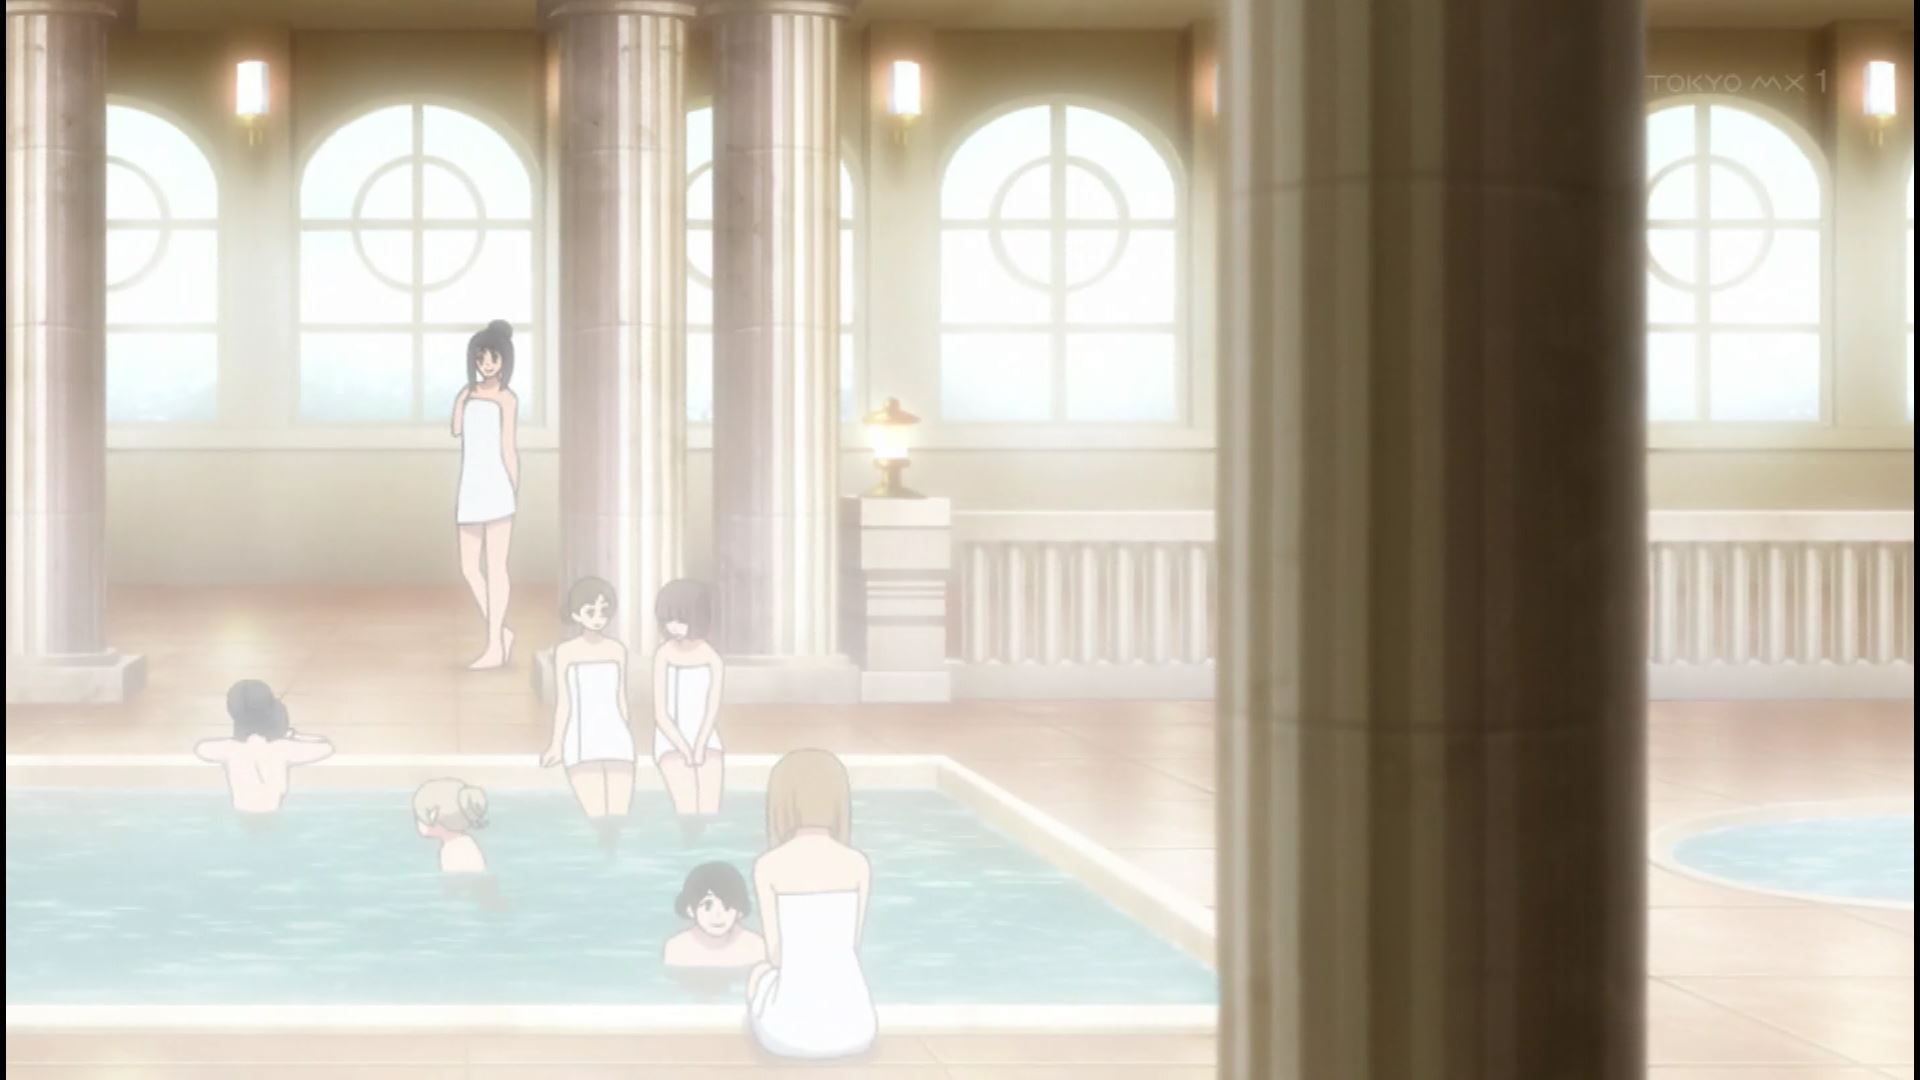 In episode 4 of the anime "True Companion", there is an erotic scene where you enter the sauna naked with an erotic boob girl! 9